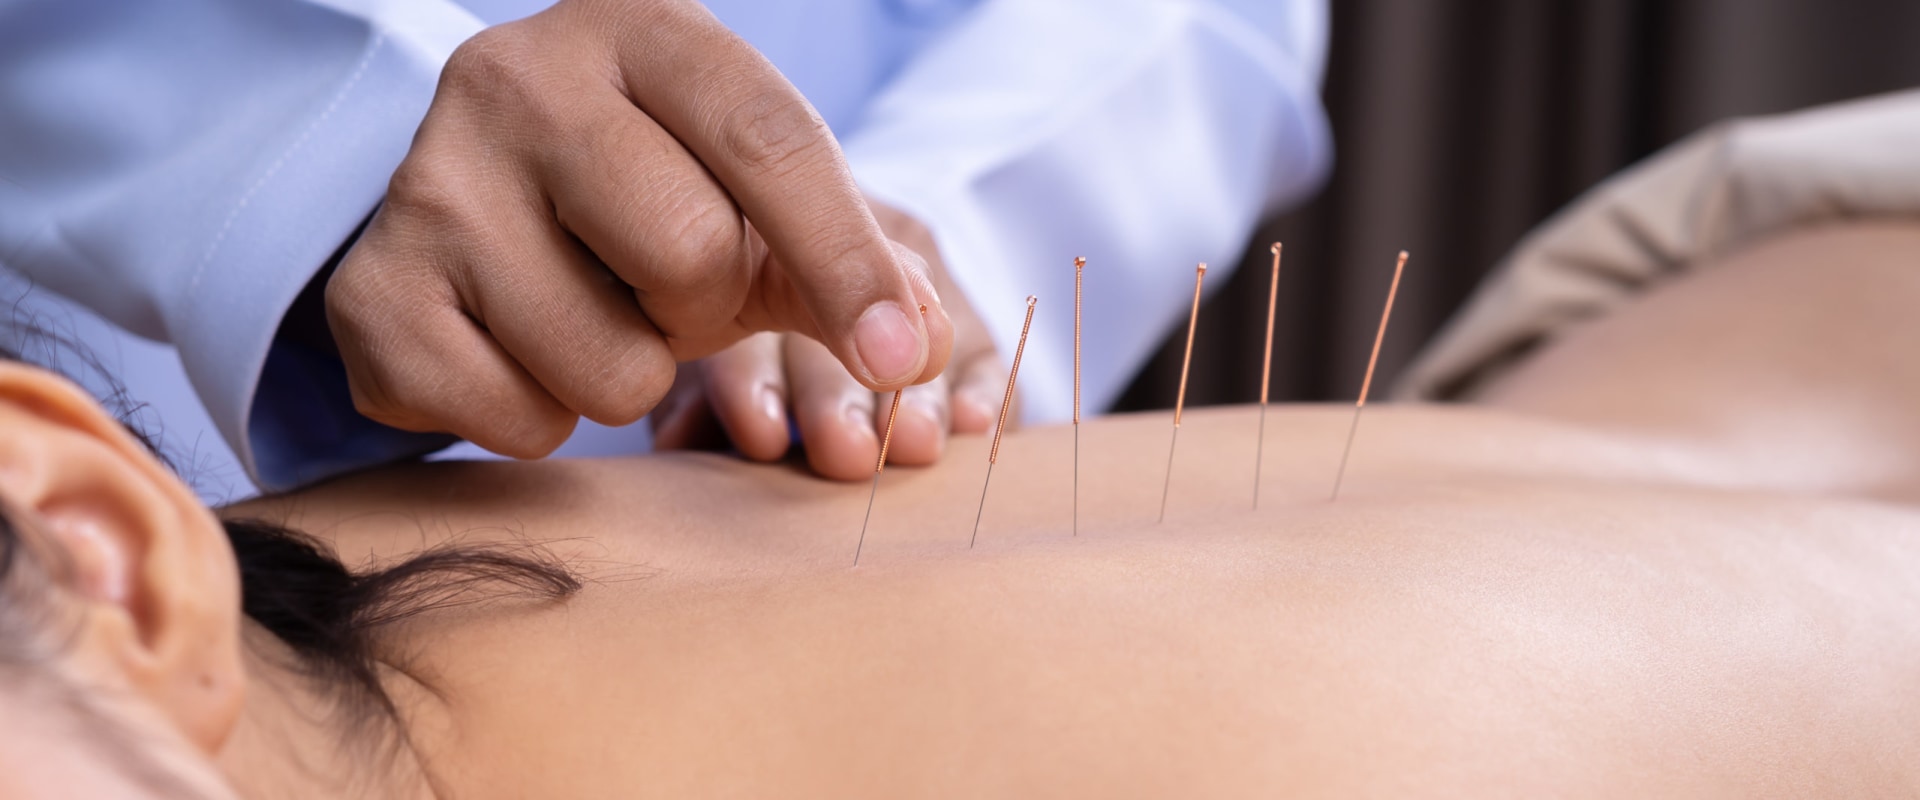 What to Expect During an Acupuncture Session